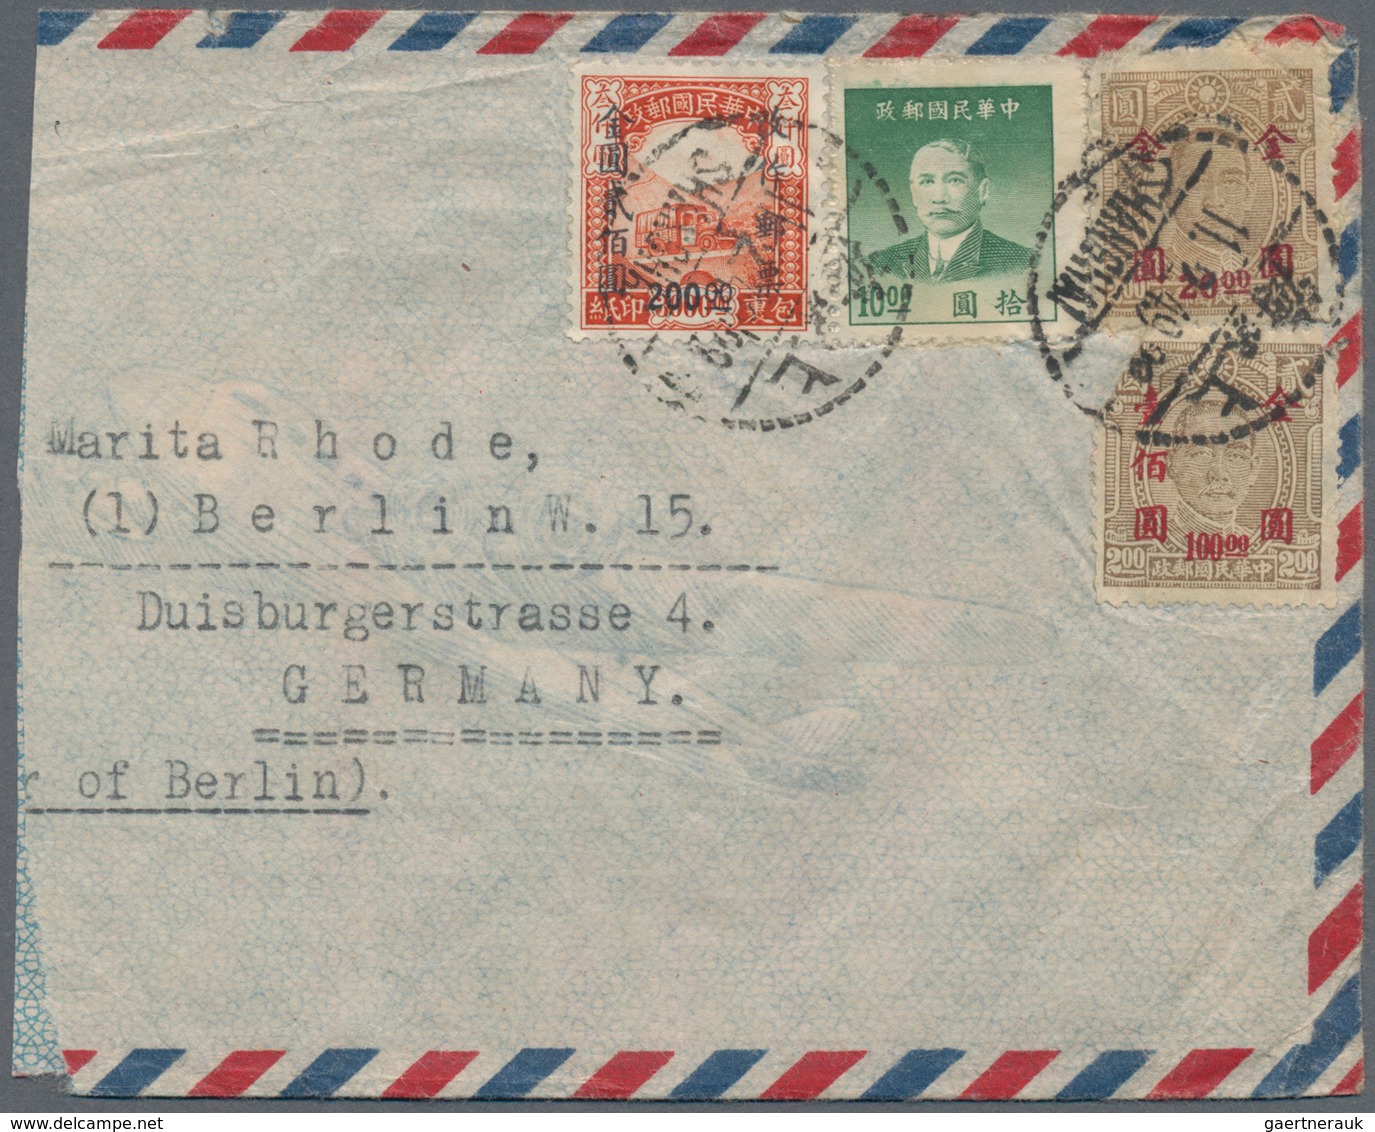 China: 1946/49, covers (10, inc. 7 by air) all from a correspondence to Berlin British Sector (two w